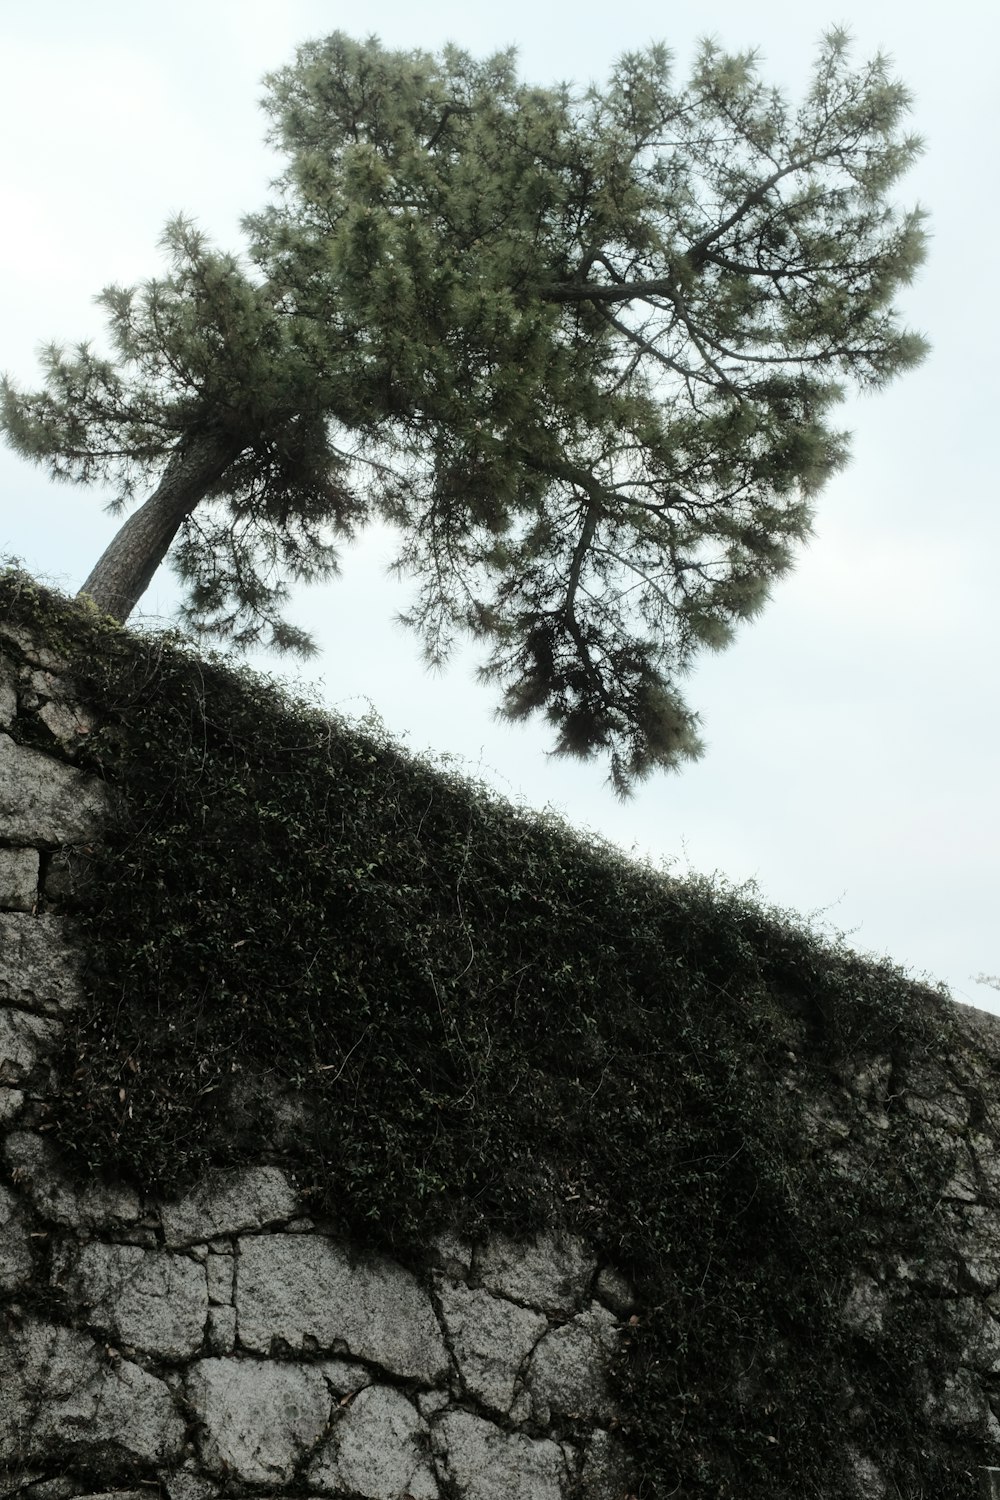 a tree is growing on the side of a stone wall